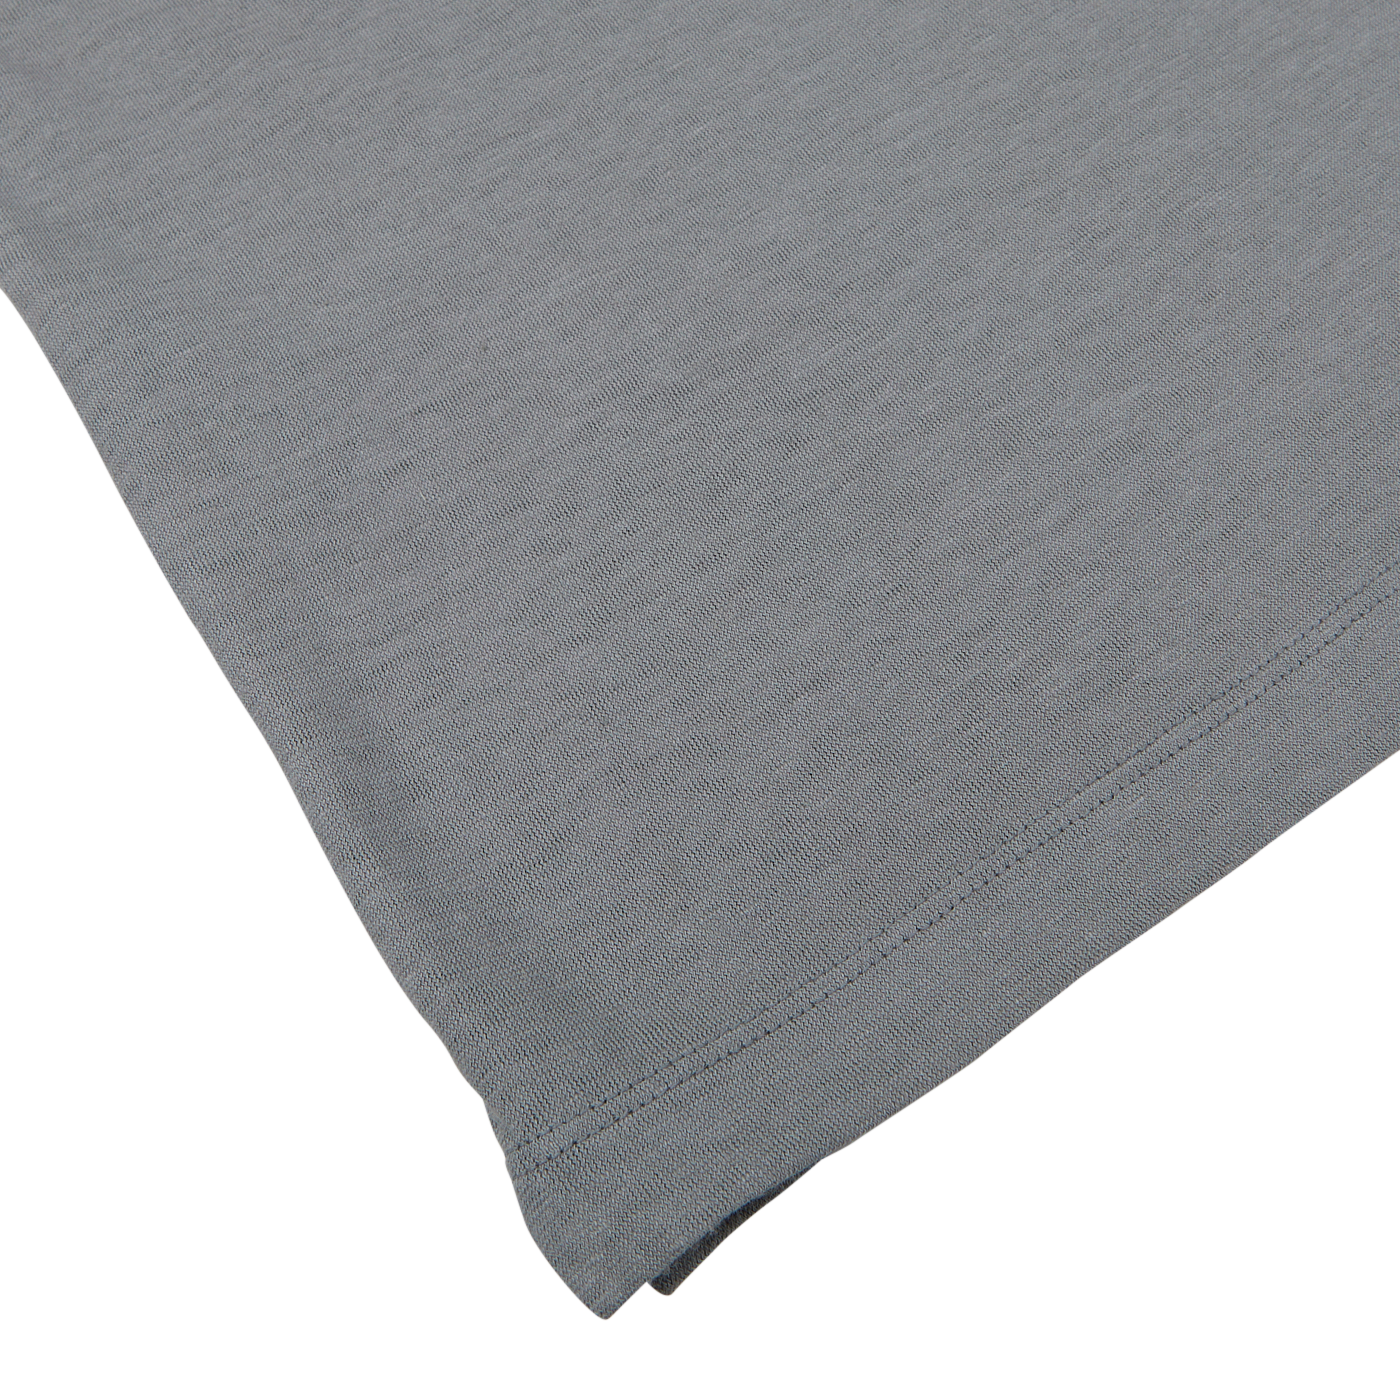 Steel Grey Cotton Linen Polo Shirt by Drumohr, with a visible weave pattern and finished edge on a white background.